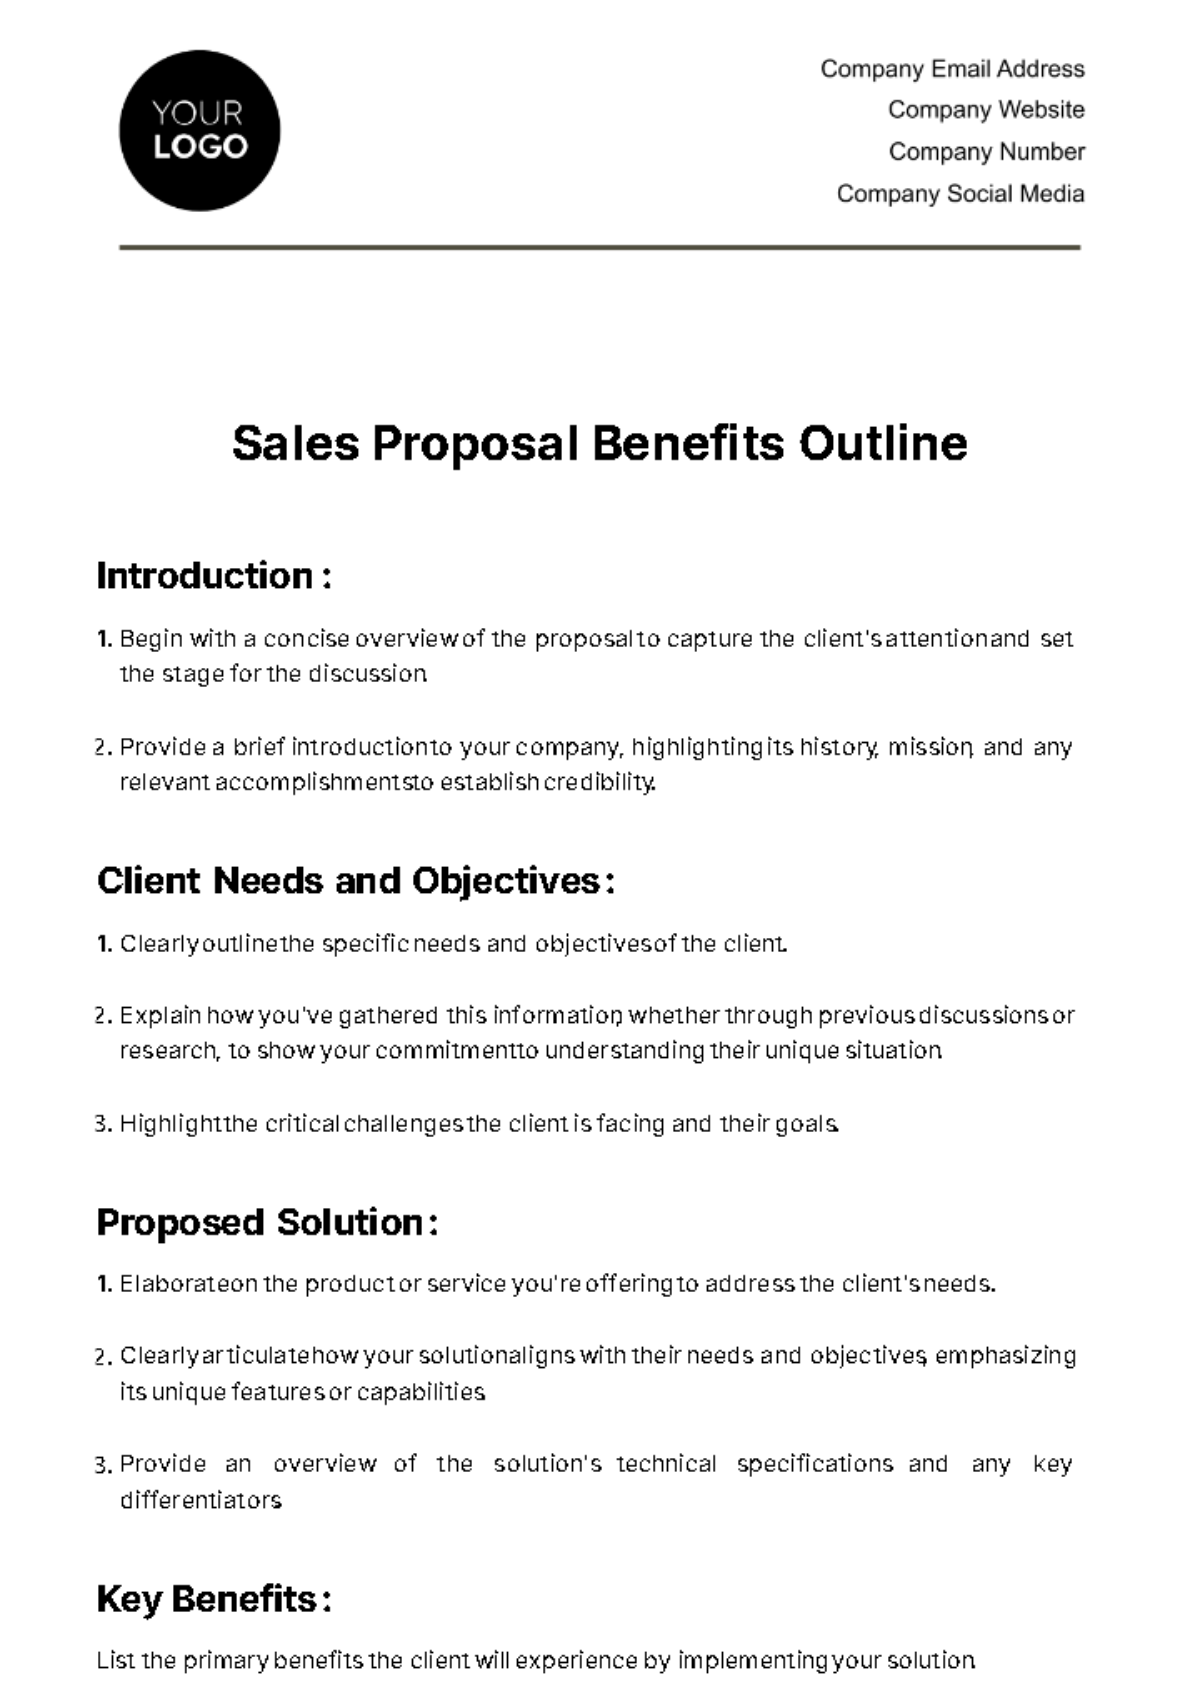 Sales Proposal Benefits Outline Template